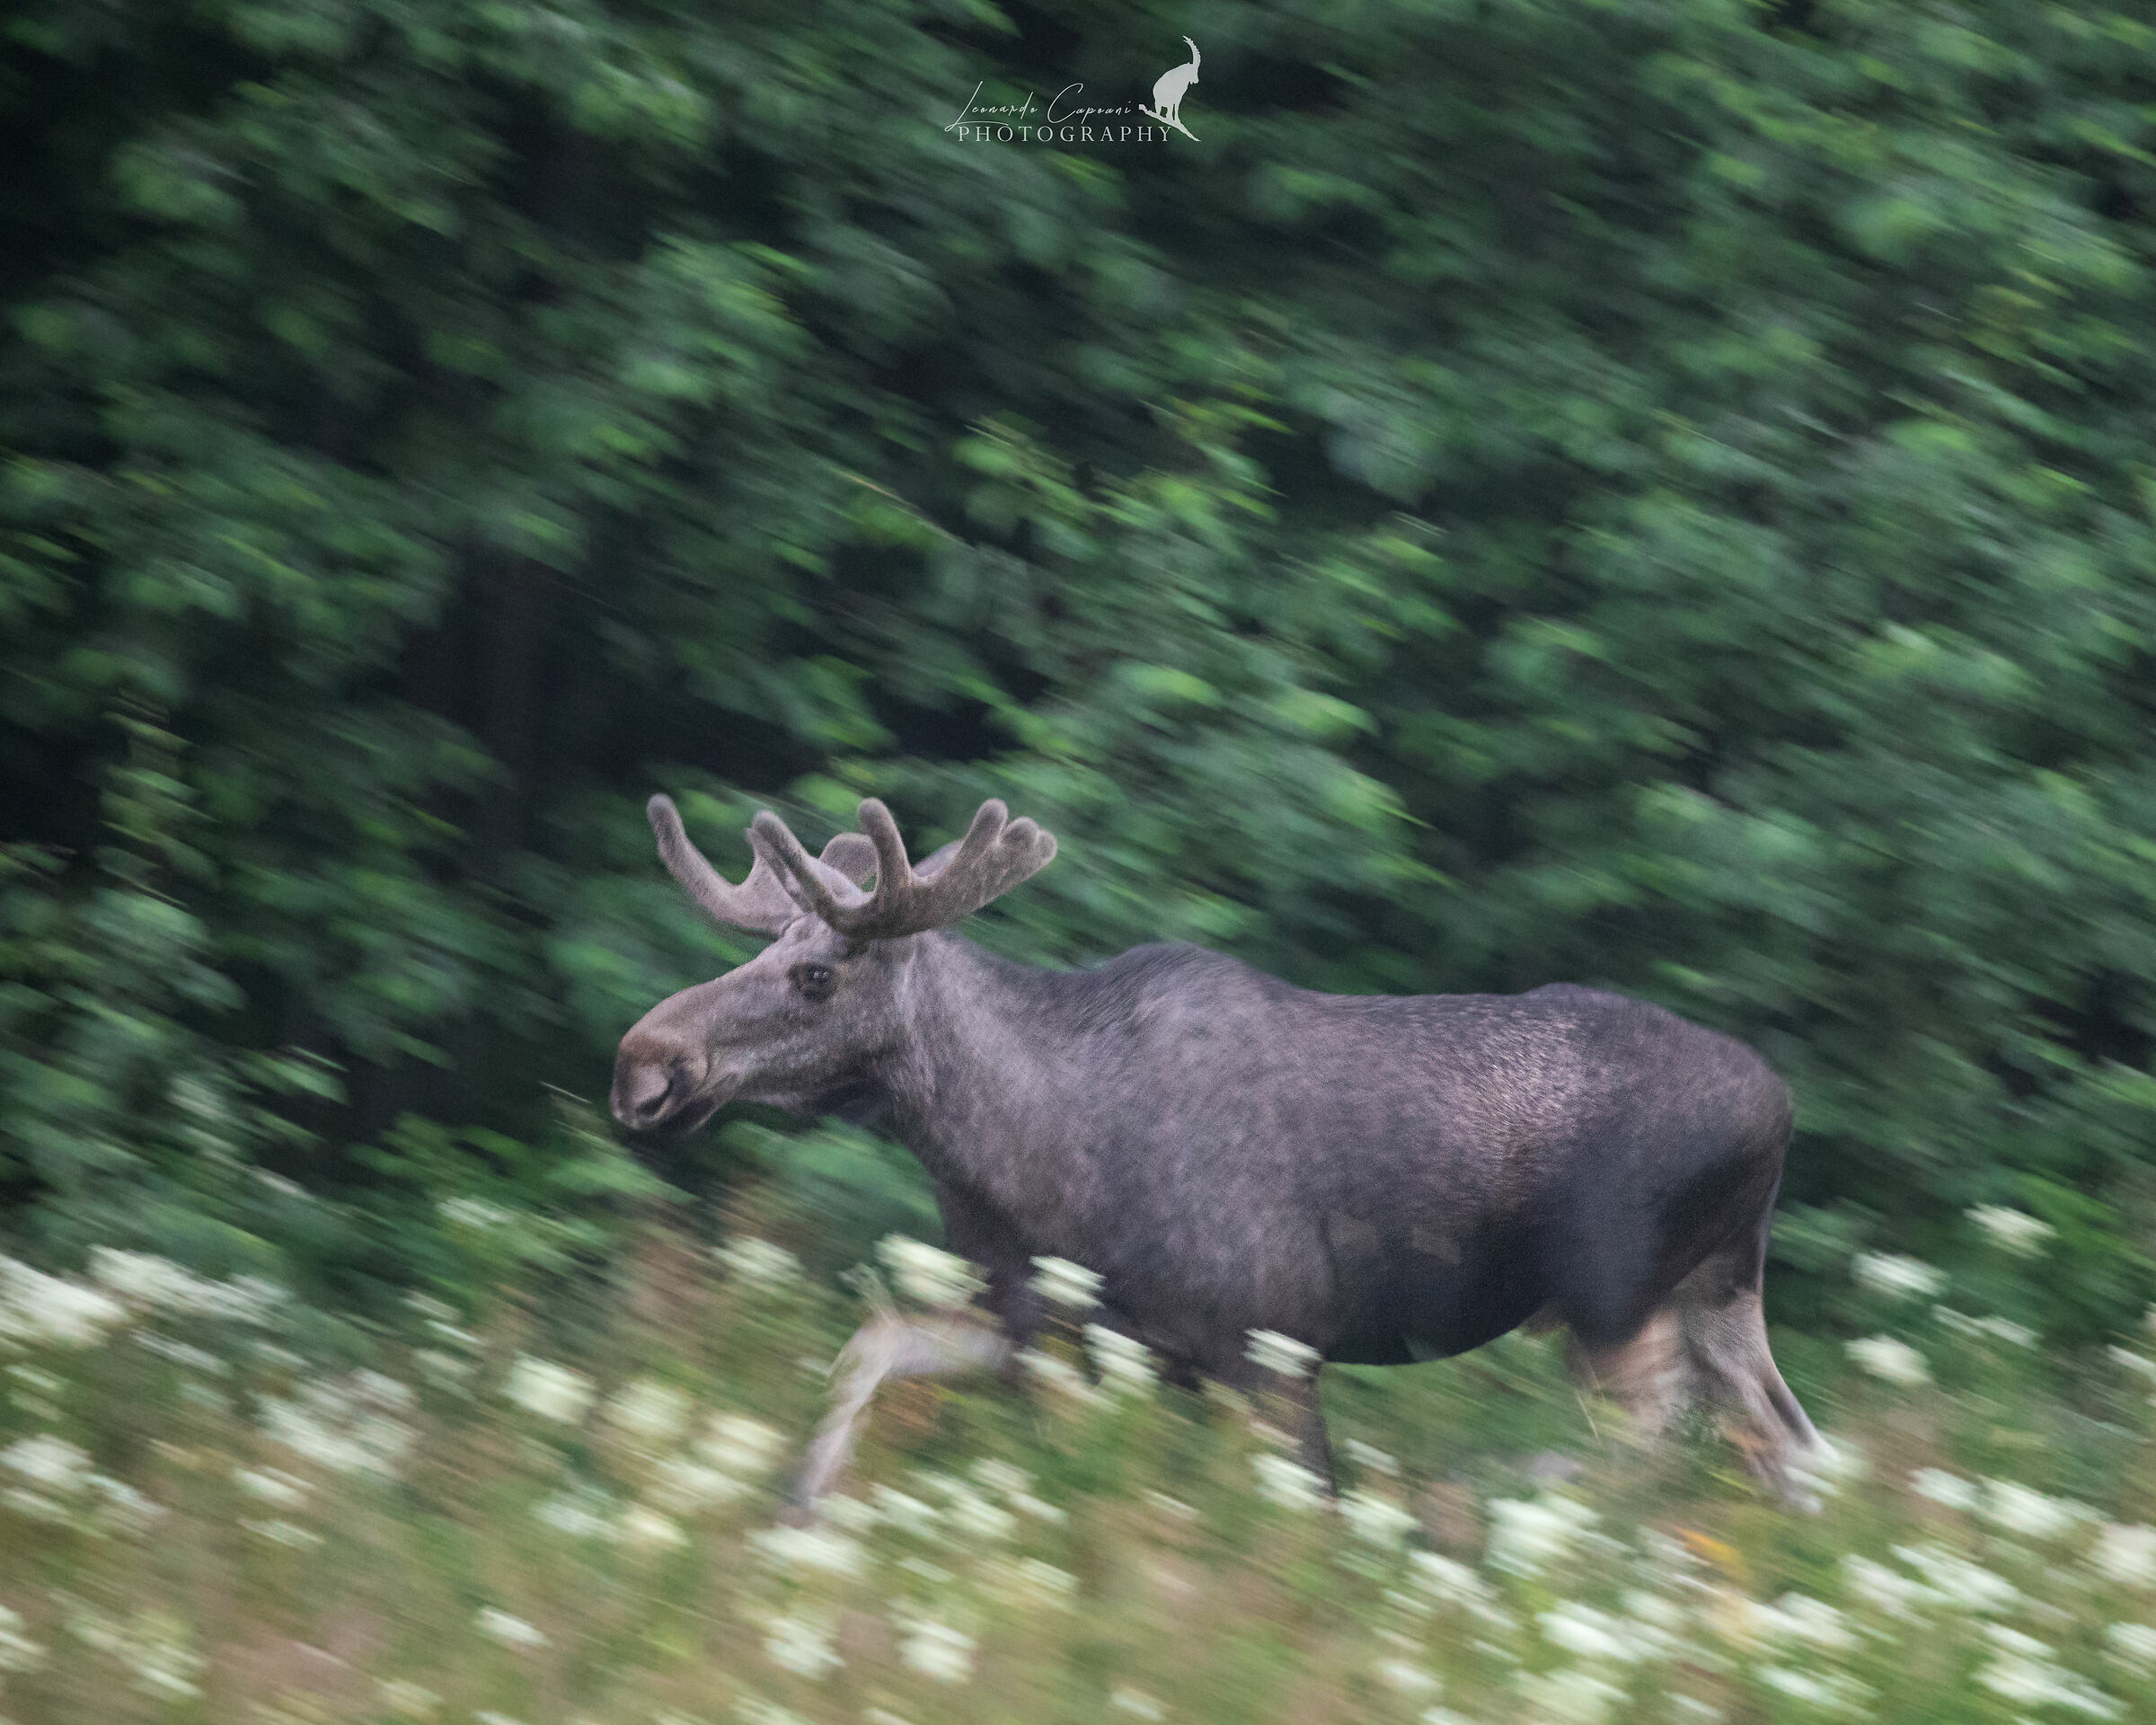 Moose on the move/ Moving moose...